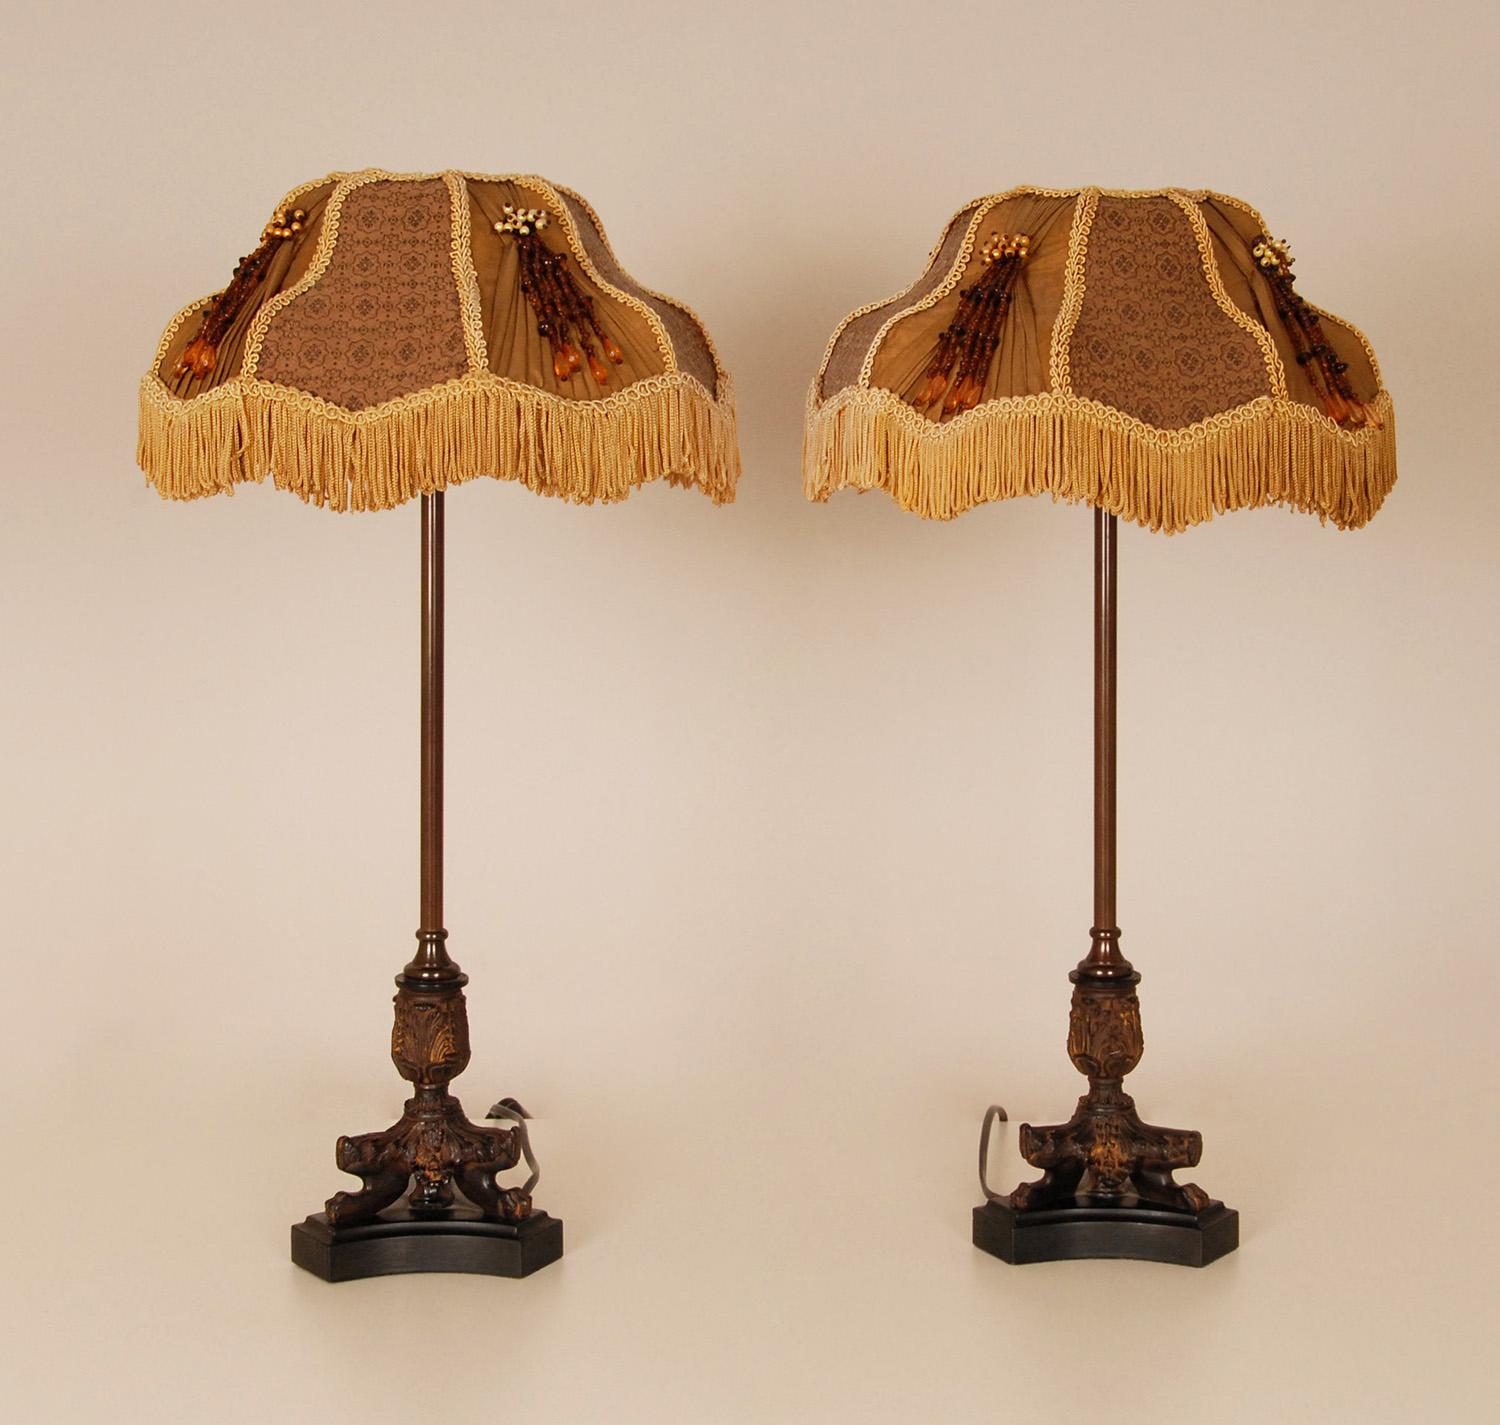 Vintage French Napoleonic Table Lamps Tripod Base Lion Paws Empire Lamps a Pair In Good Condition For Sale In Wommelgem, VAN